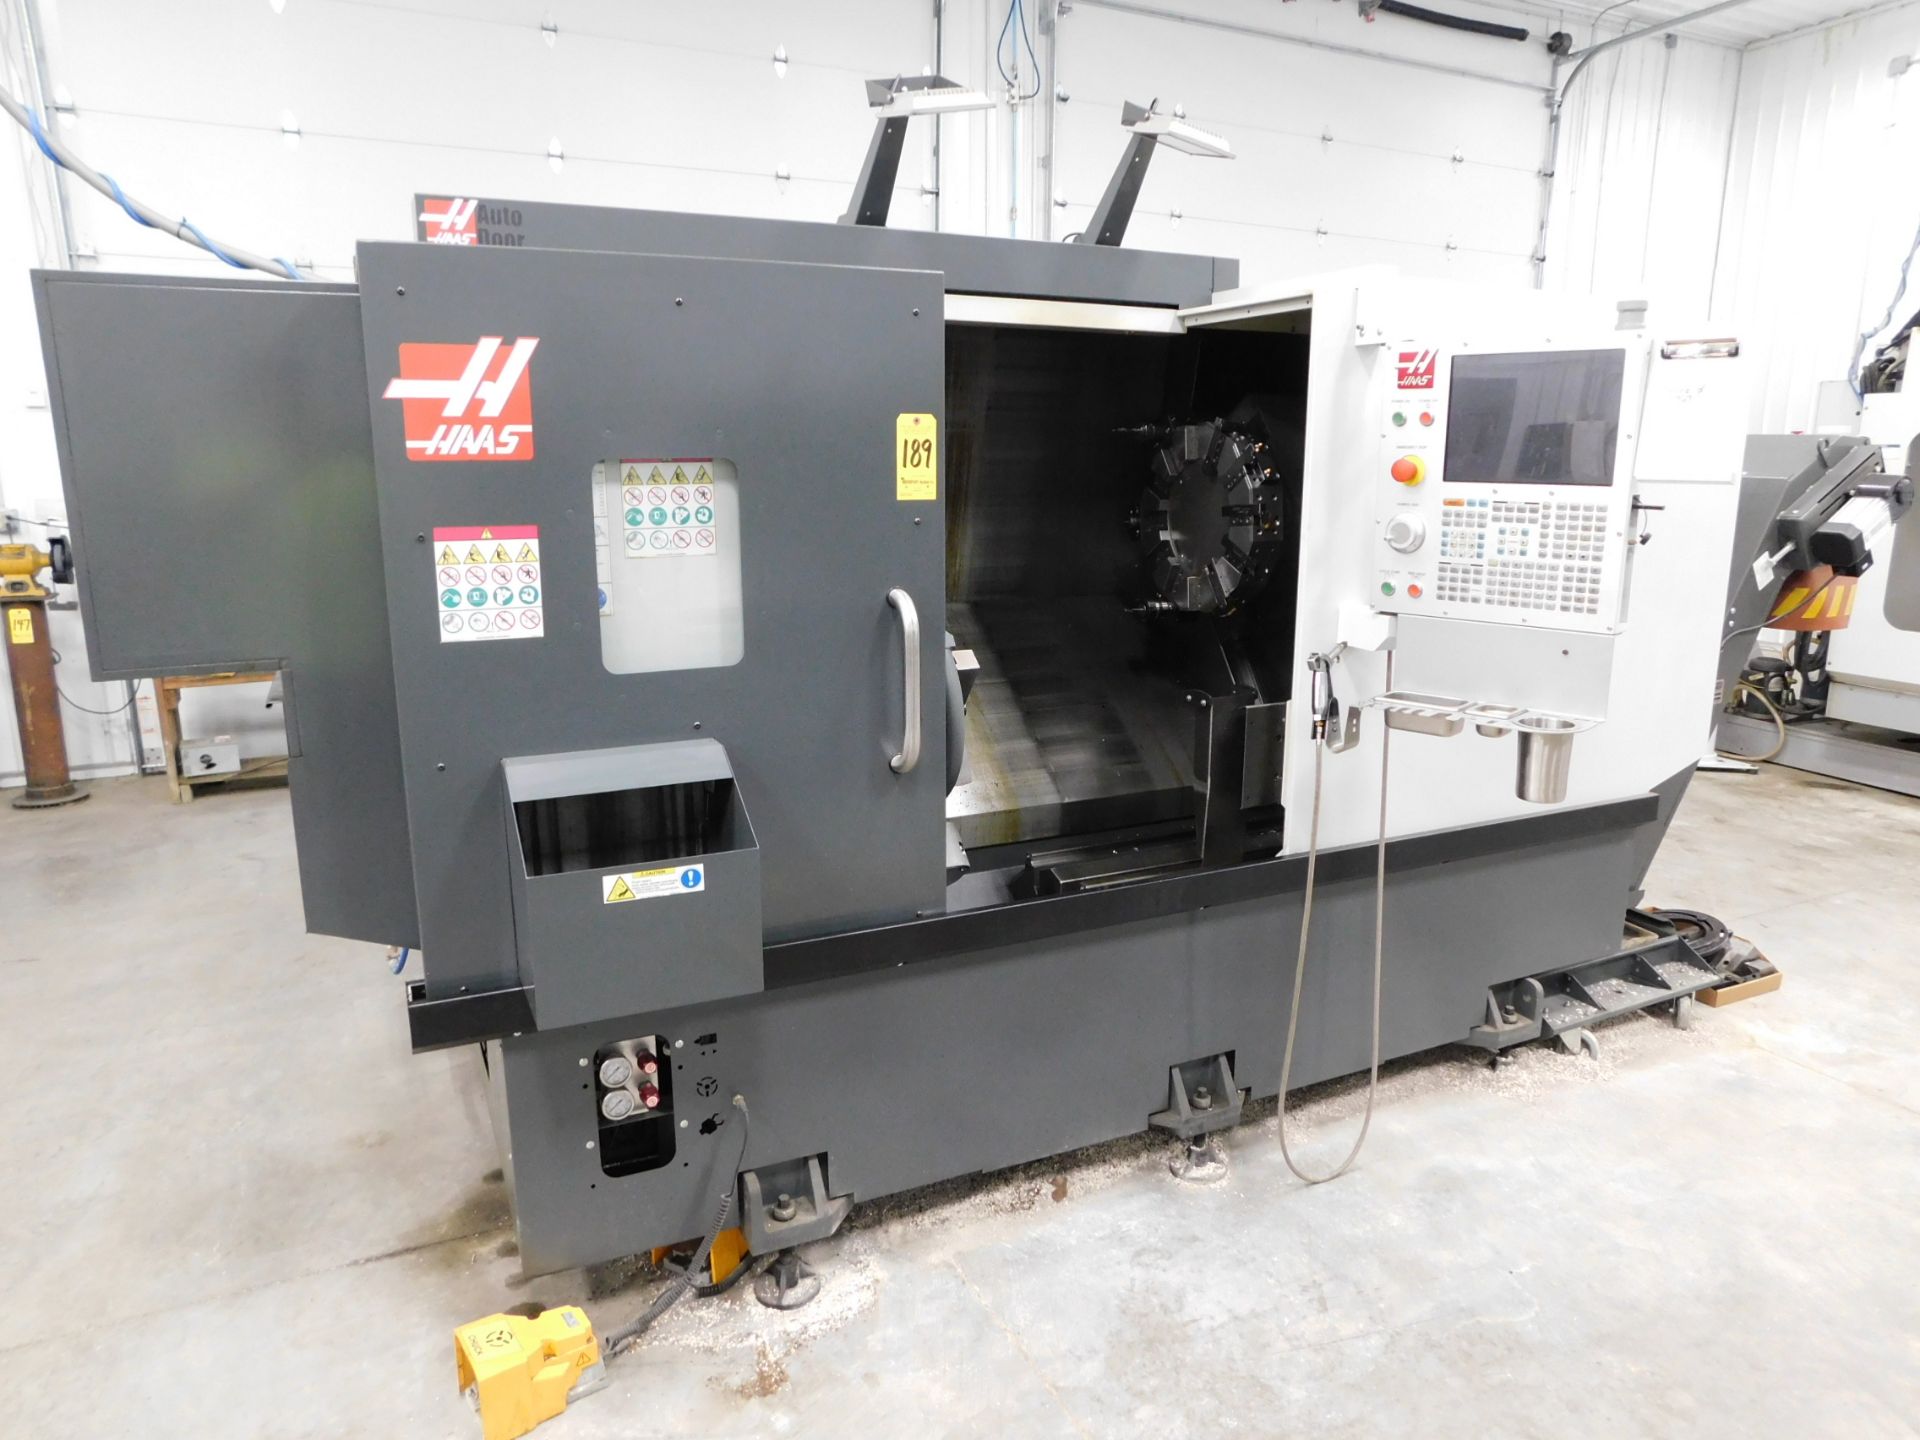 Haas ST30 CNC Turning Center sn 3119670, New in 2020, 12"3-Jaw Chuck, 12-Station Turret, - Image 2 of 16